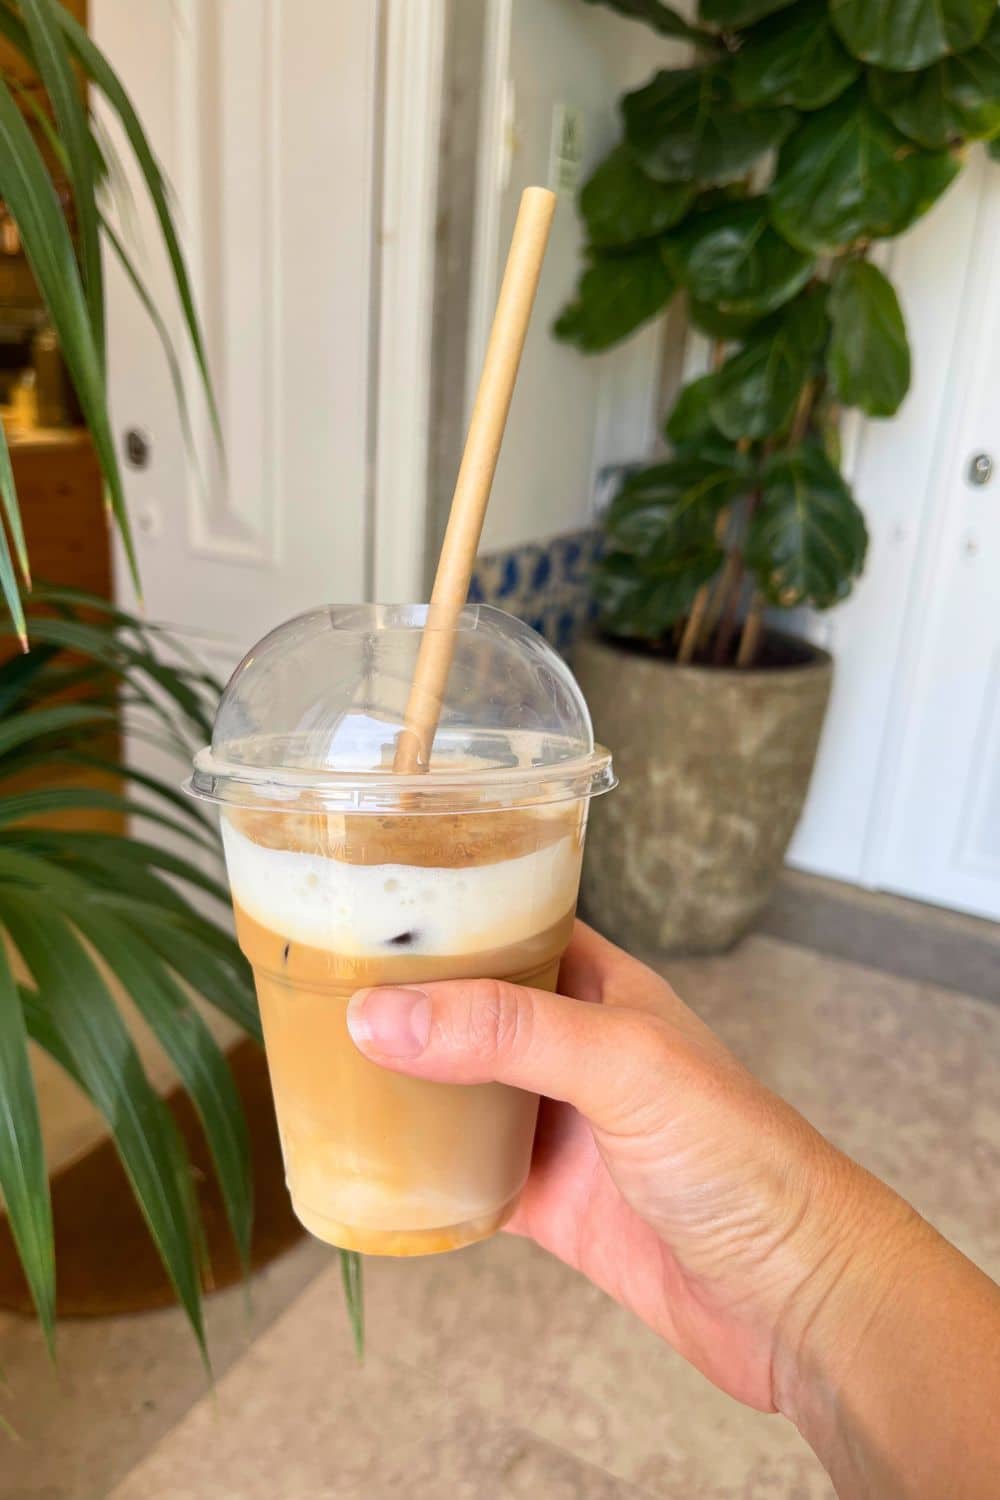 A person's hand holding a Niccolò café iced latte in a clear plastic cup with a paper straw, symbolizing the café's commitment to sustainable practices. The drink is captured against the backdrop of a serene indoor plant and tasteful decor, suggesting a moment of refreshing relaxation.